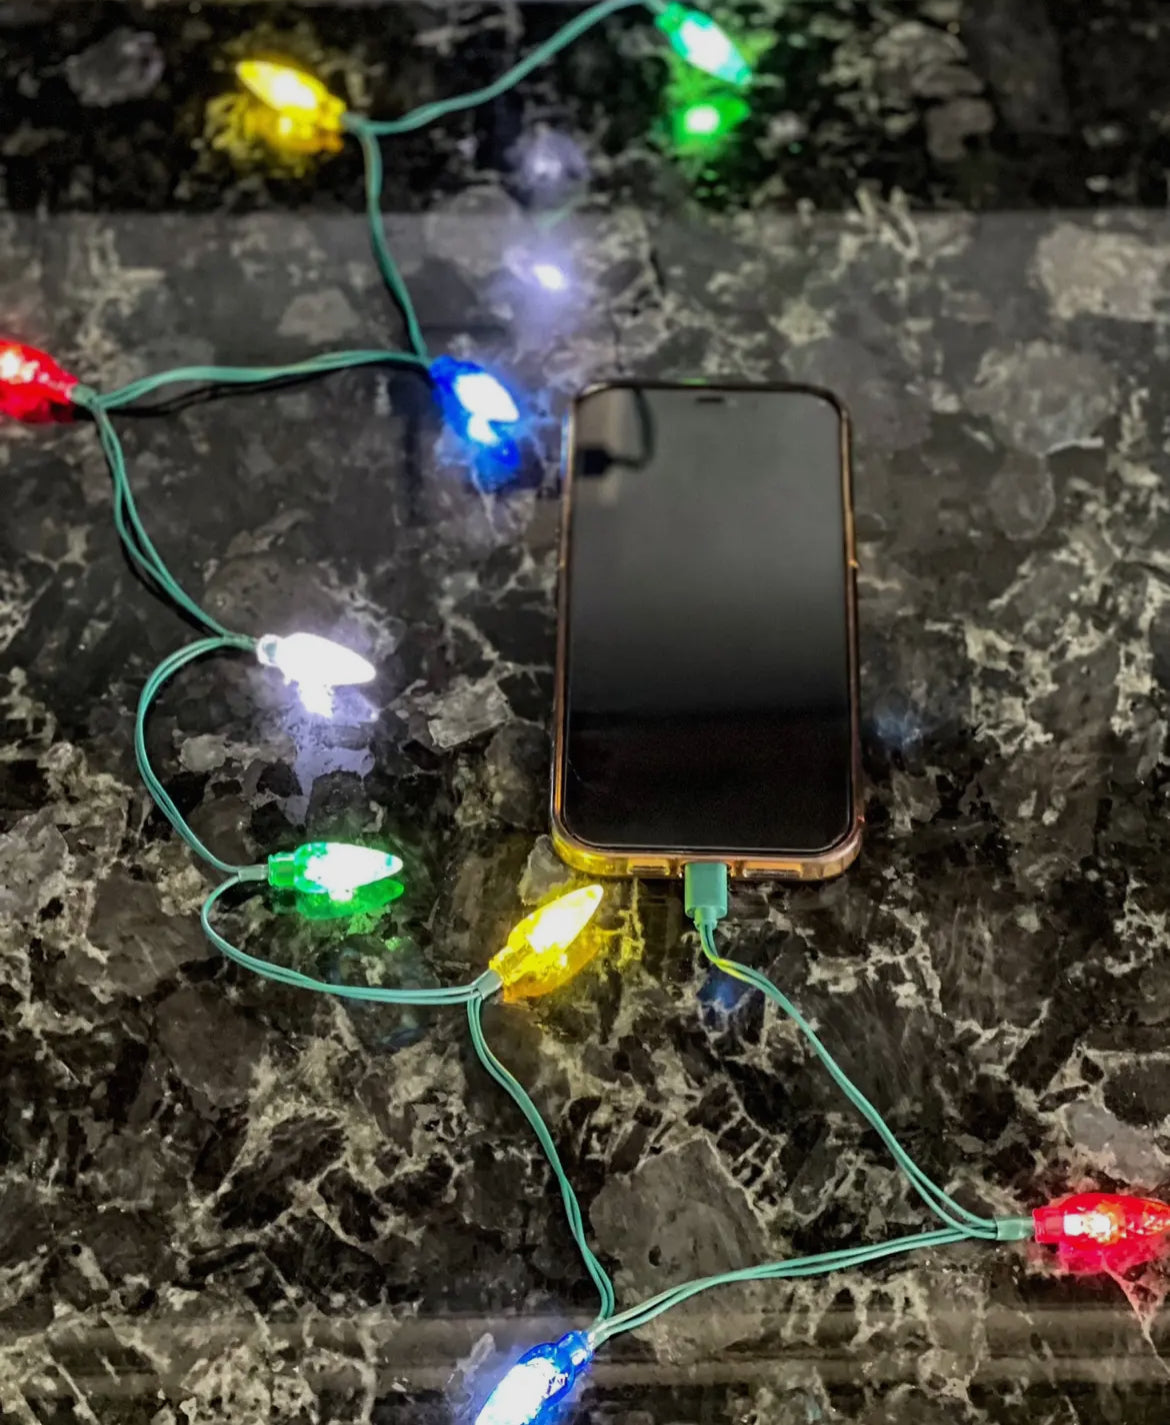 Festive Lights Phone Charger